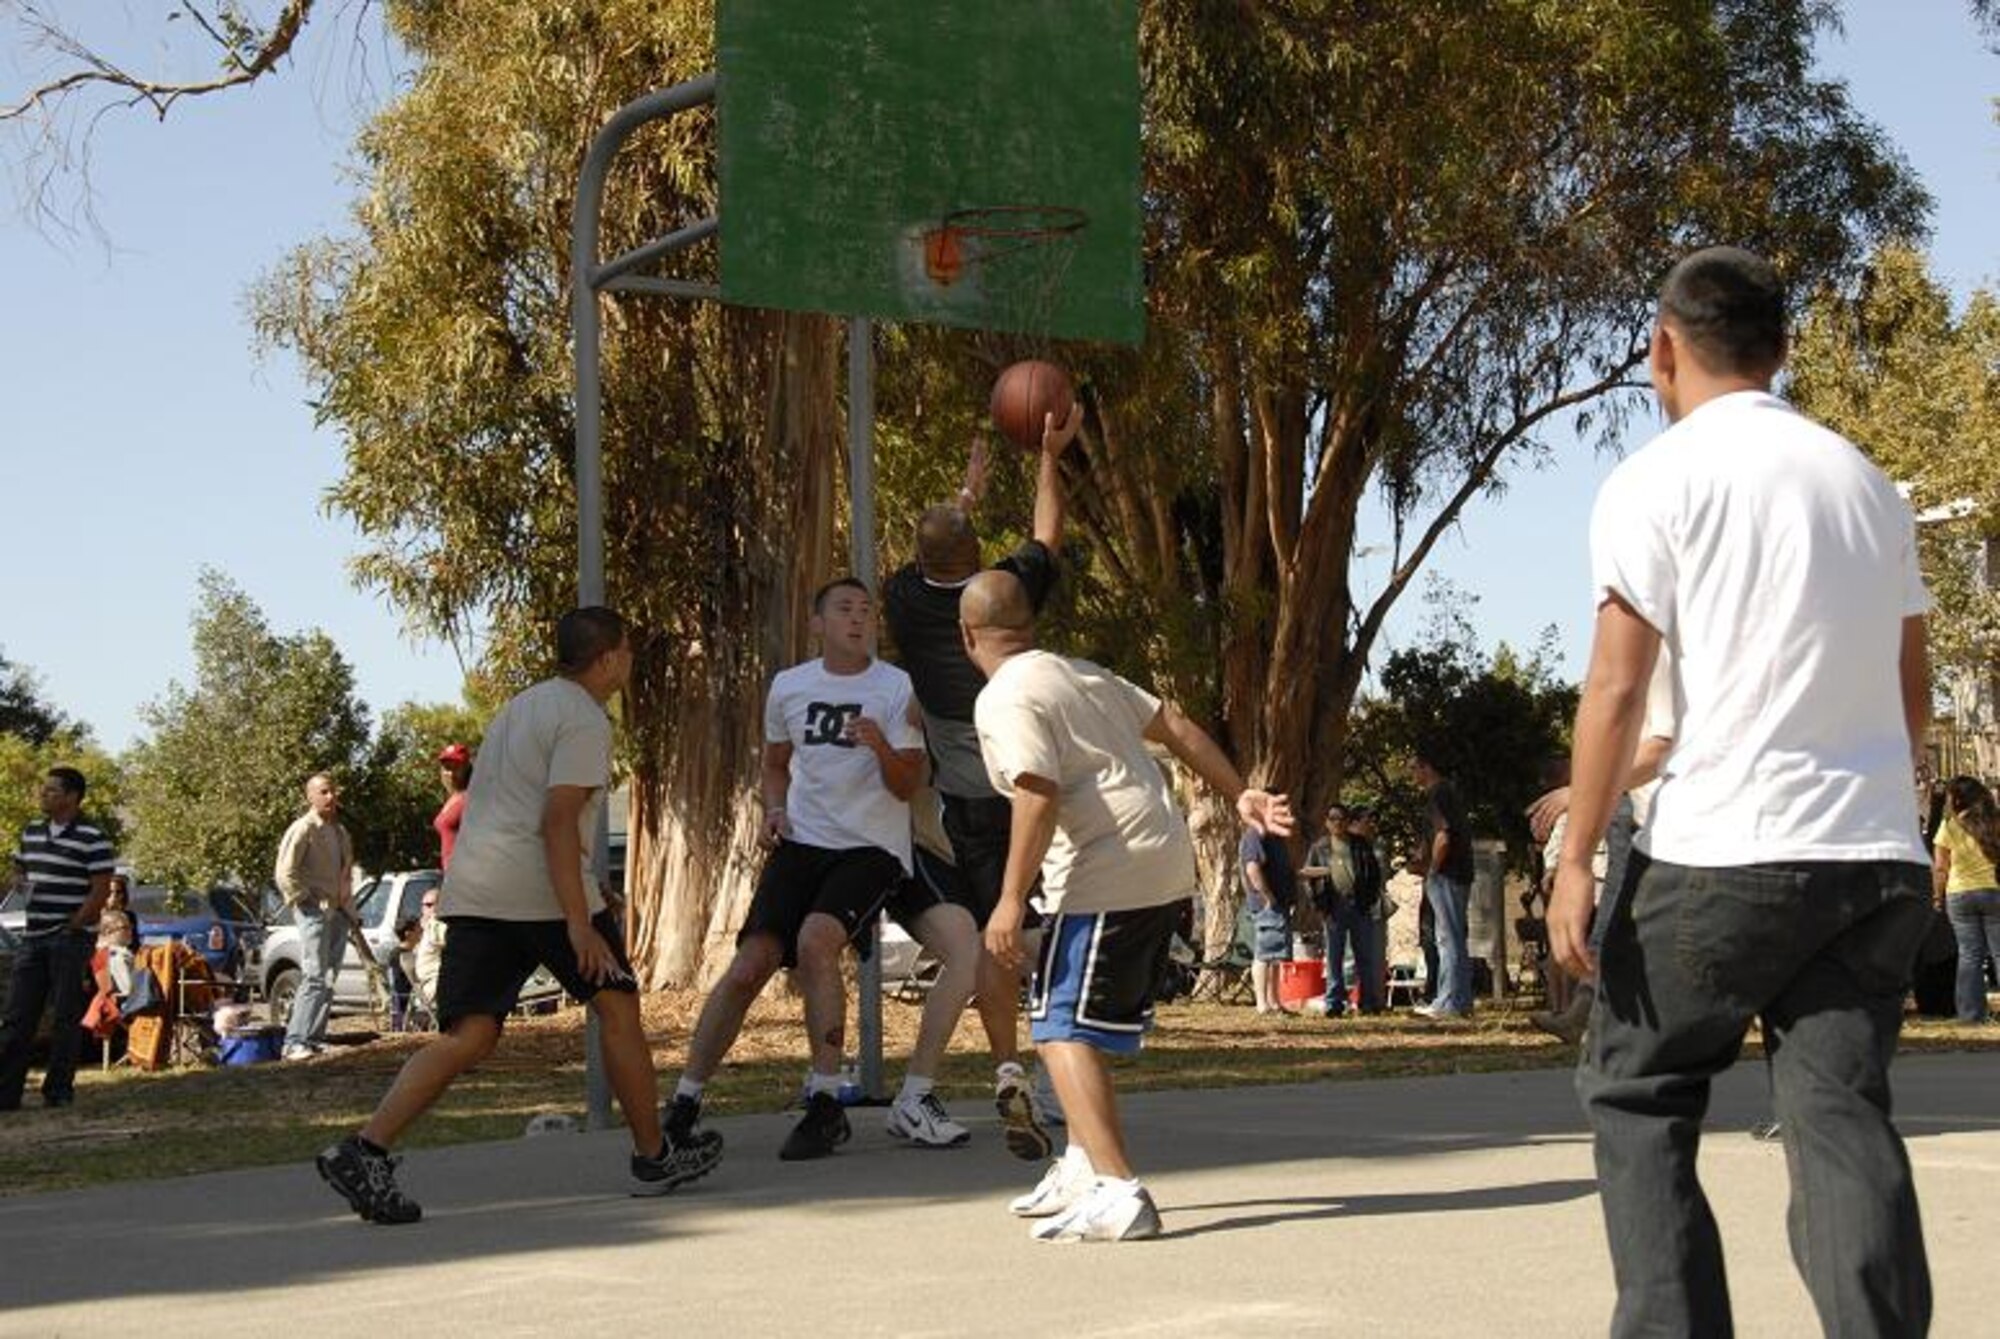 129th Rescue Wing Guardsmen, friends and family members play a game of pickup basketball while at the annual Family Day Picnic hosted Oct. 3 at Moffett Federal Airfield, Calif. (Air National Guard photo by Tech. Sgt. Ray Aquino)